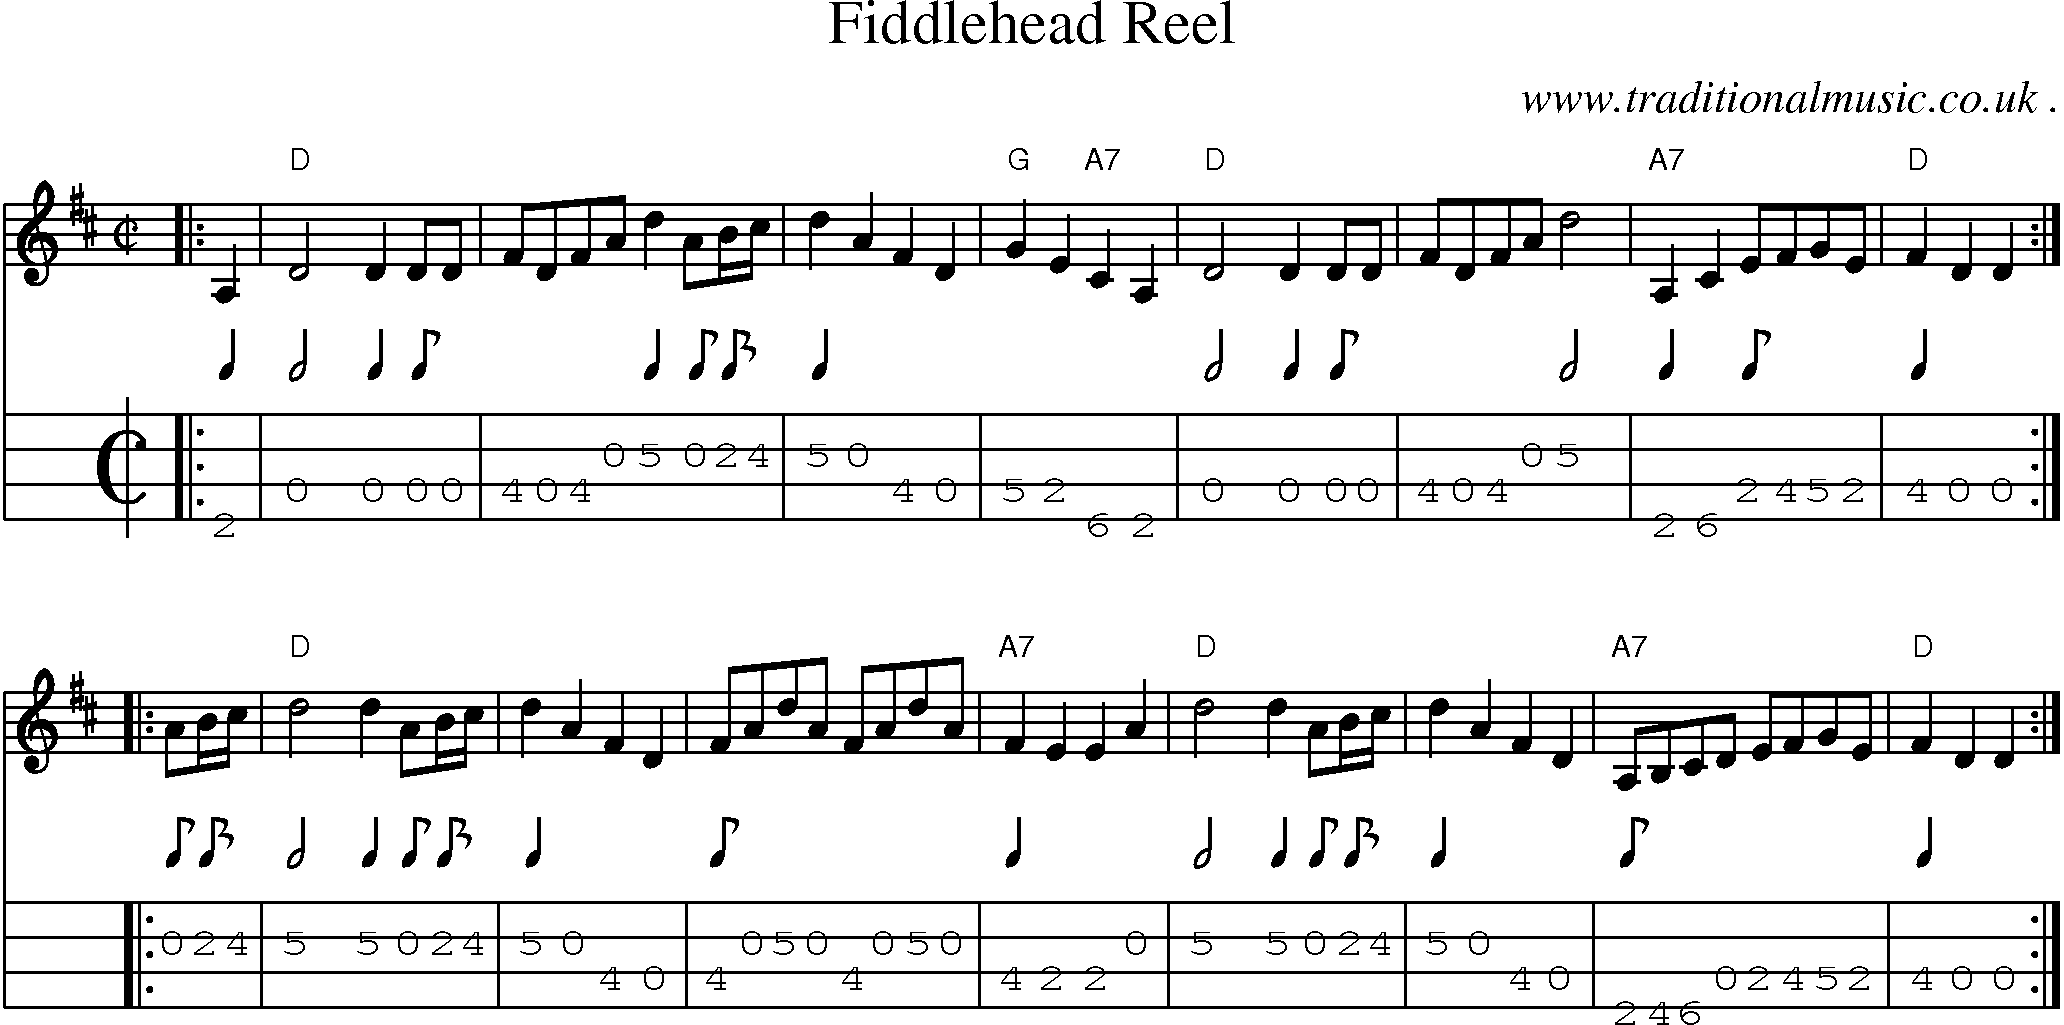 Sheet-music  score, Chords and Mandolin Tabs for Fiddlehead Reel